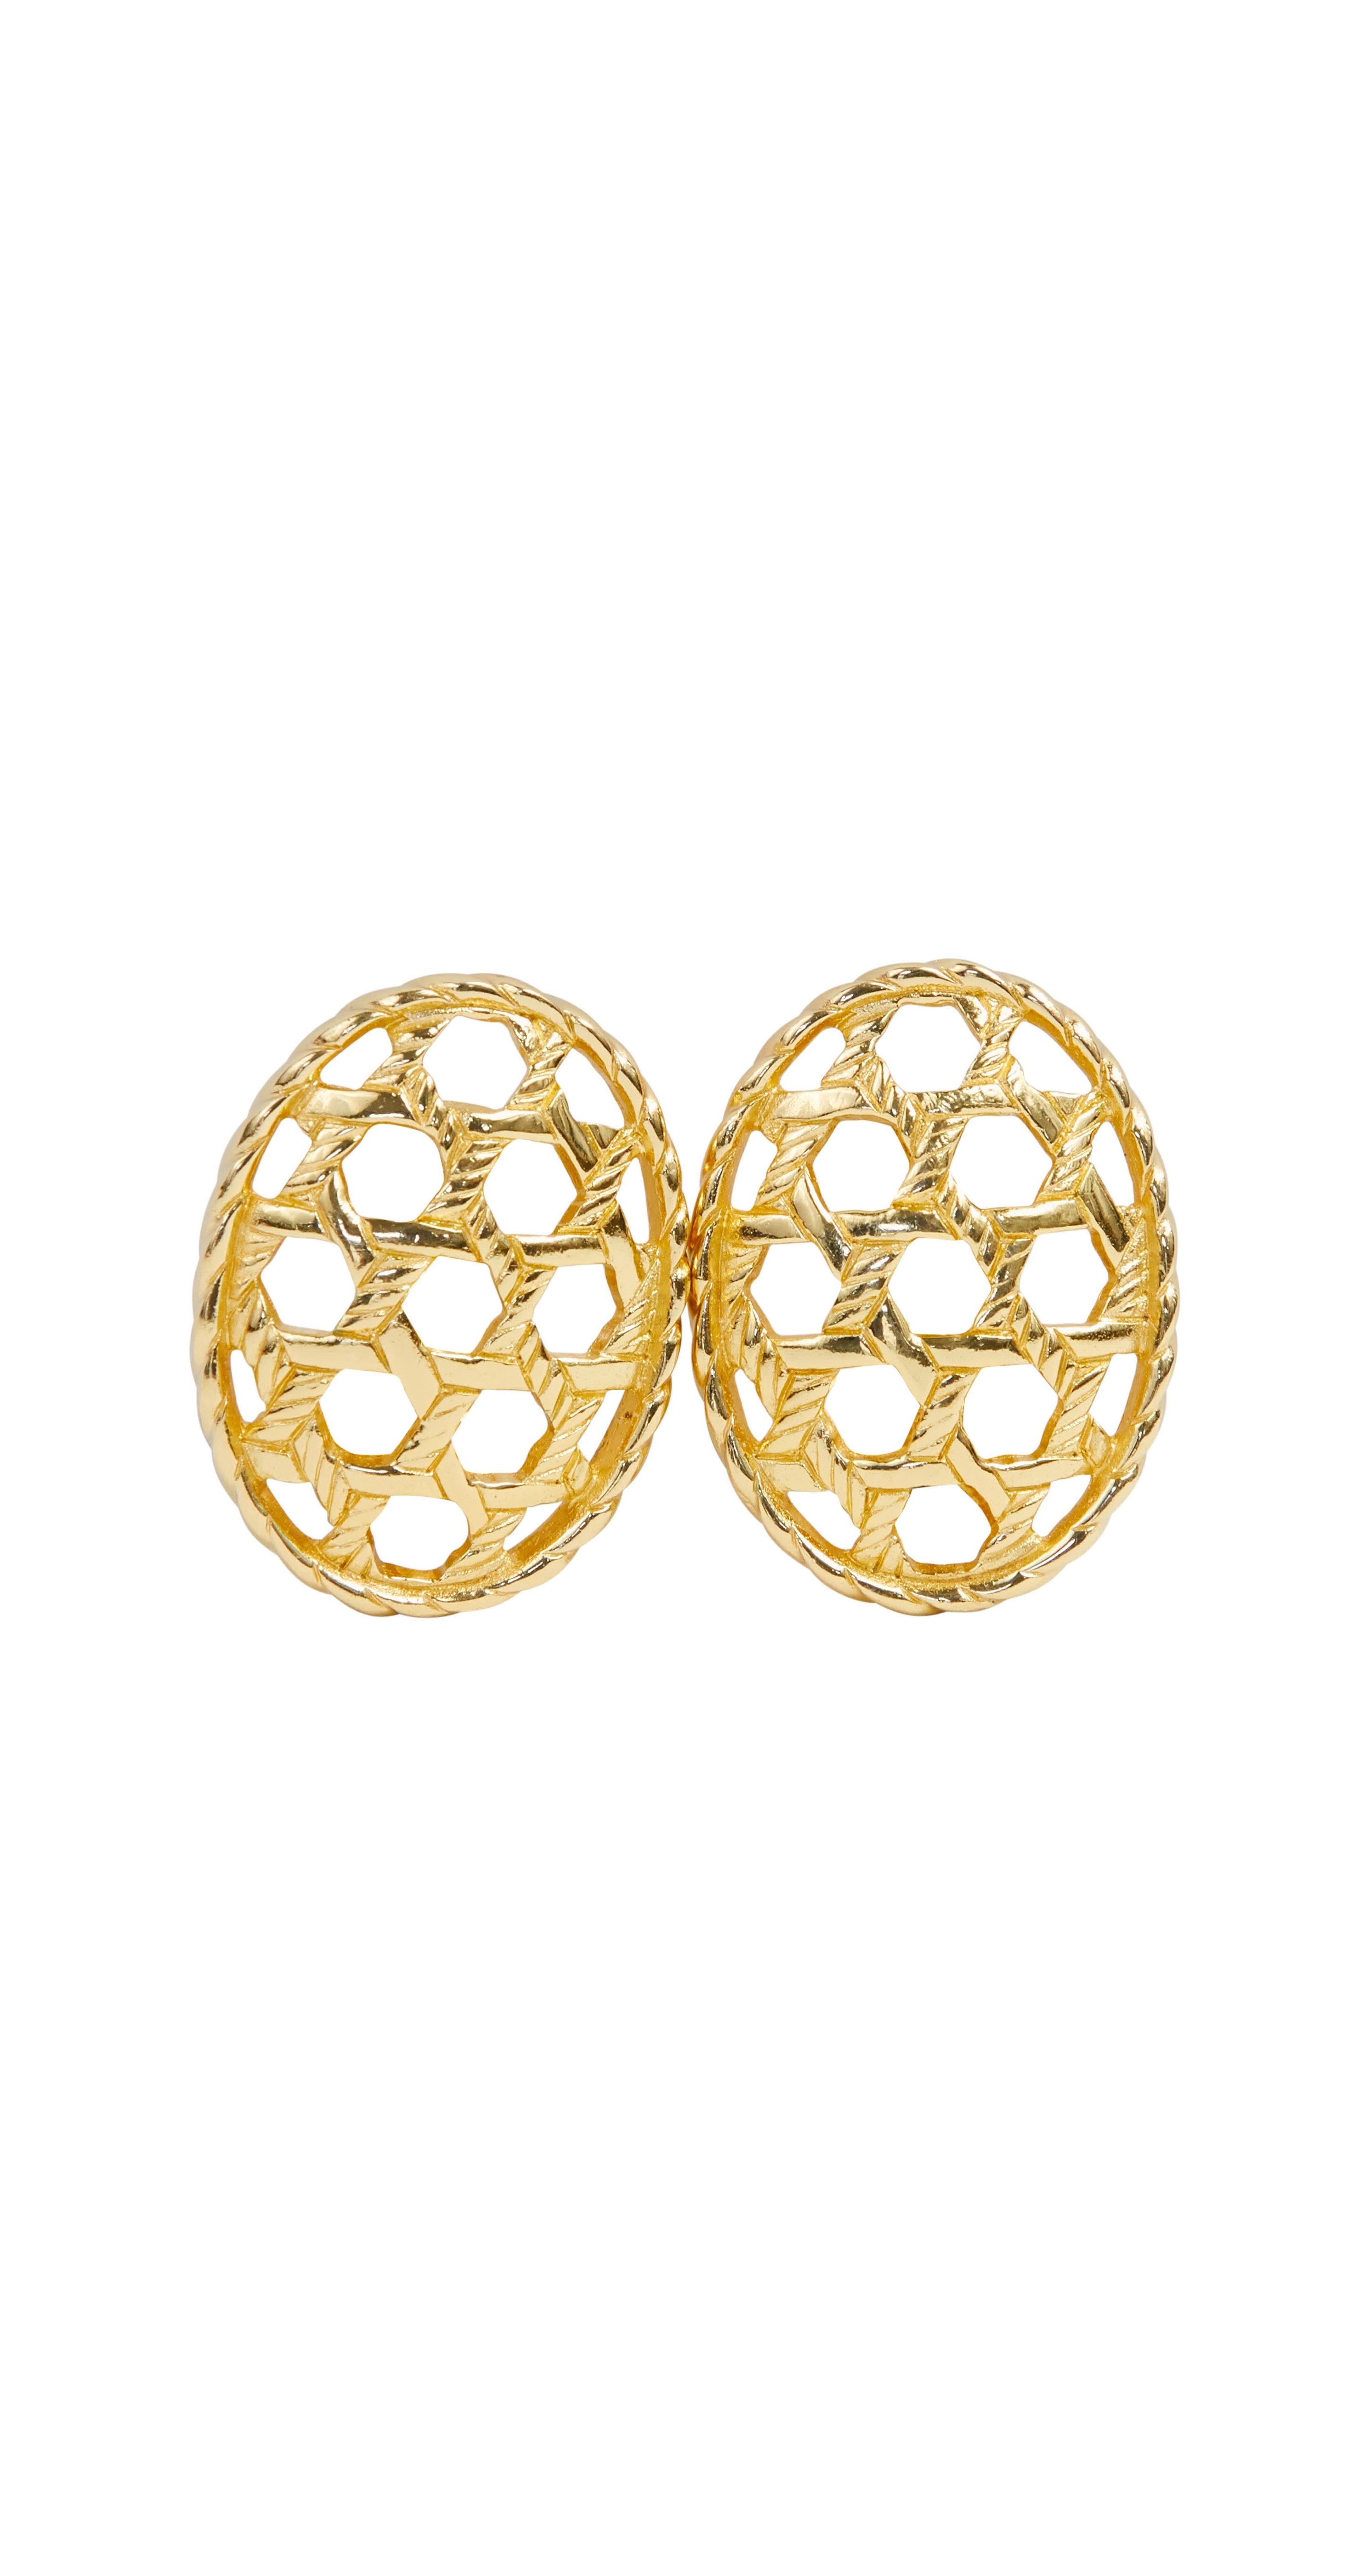 1980s Gold Plated Cut-Out Clip-On Earrings